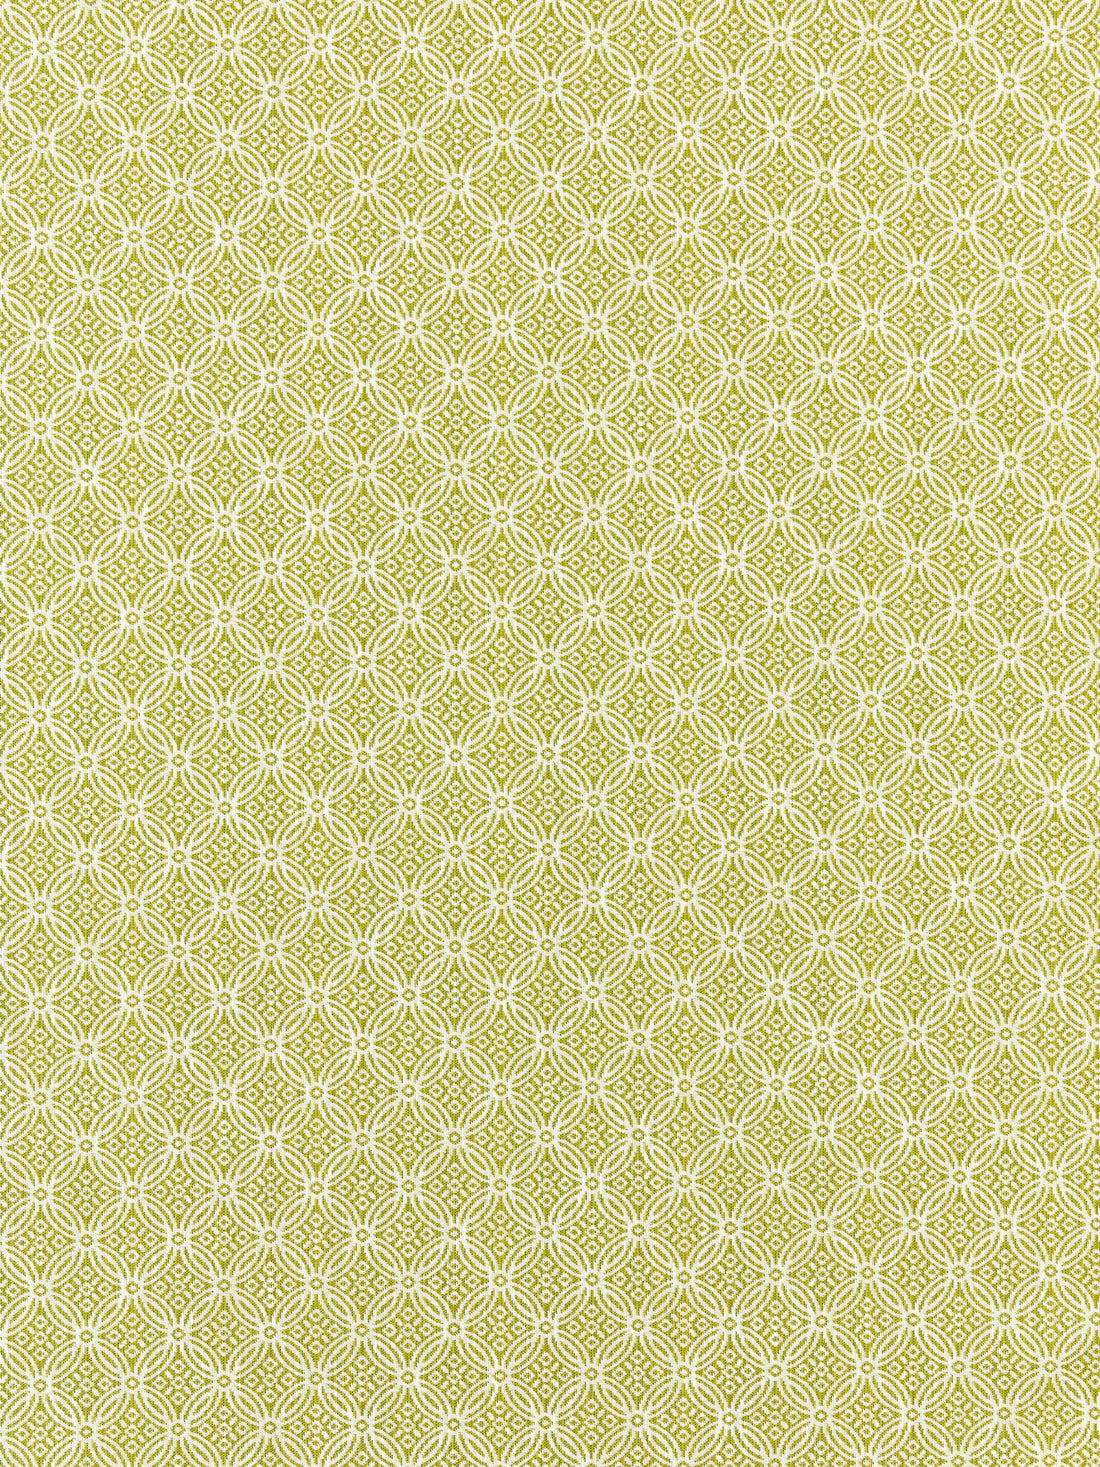 Cape May fabric in key lime color - pattern number SC 000227317 - by Scalamandre in the Scalamandre Fabrics Book 1 collection